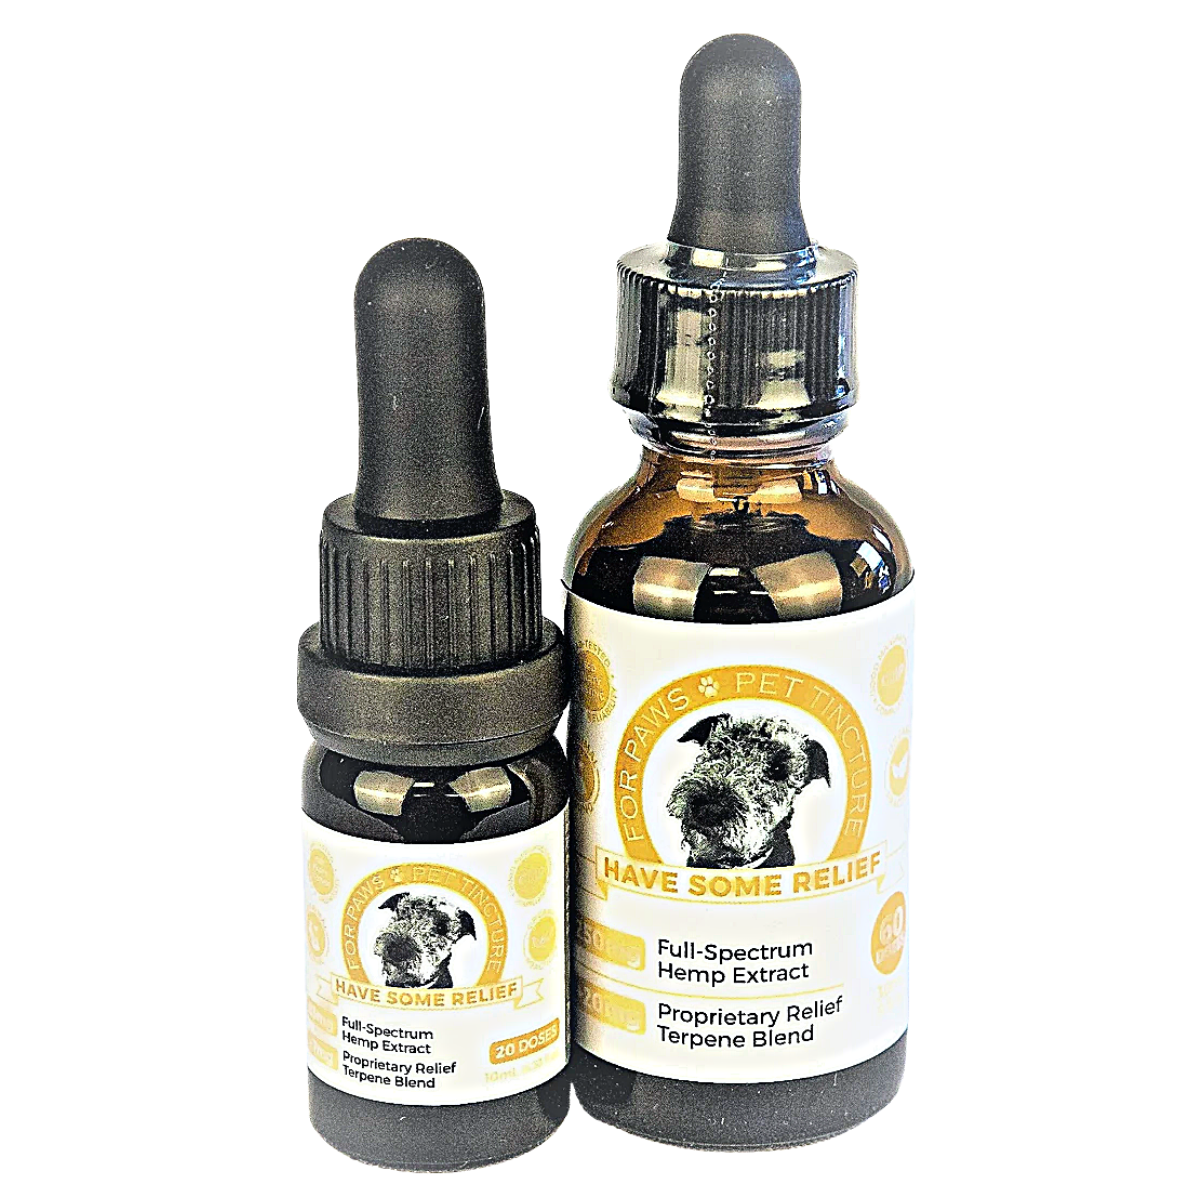 Have Some Relief Pet Tinctures